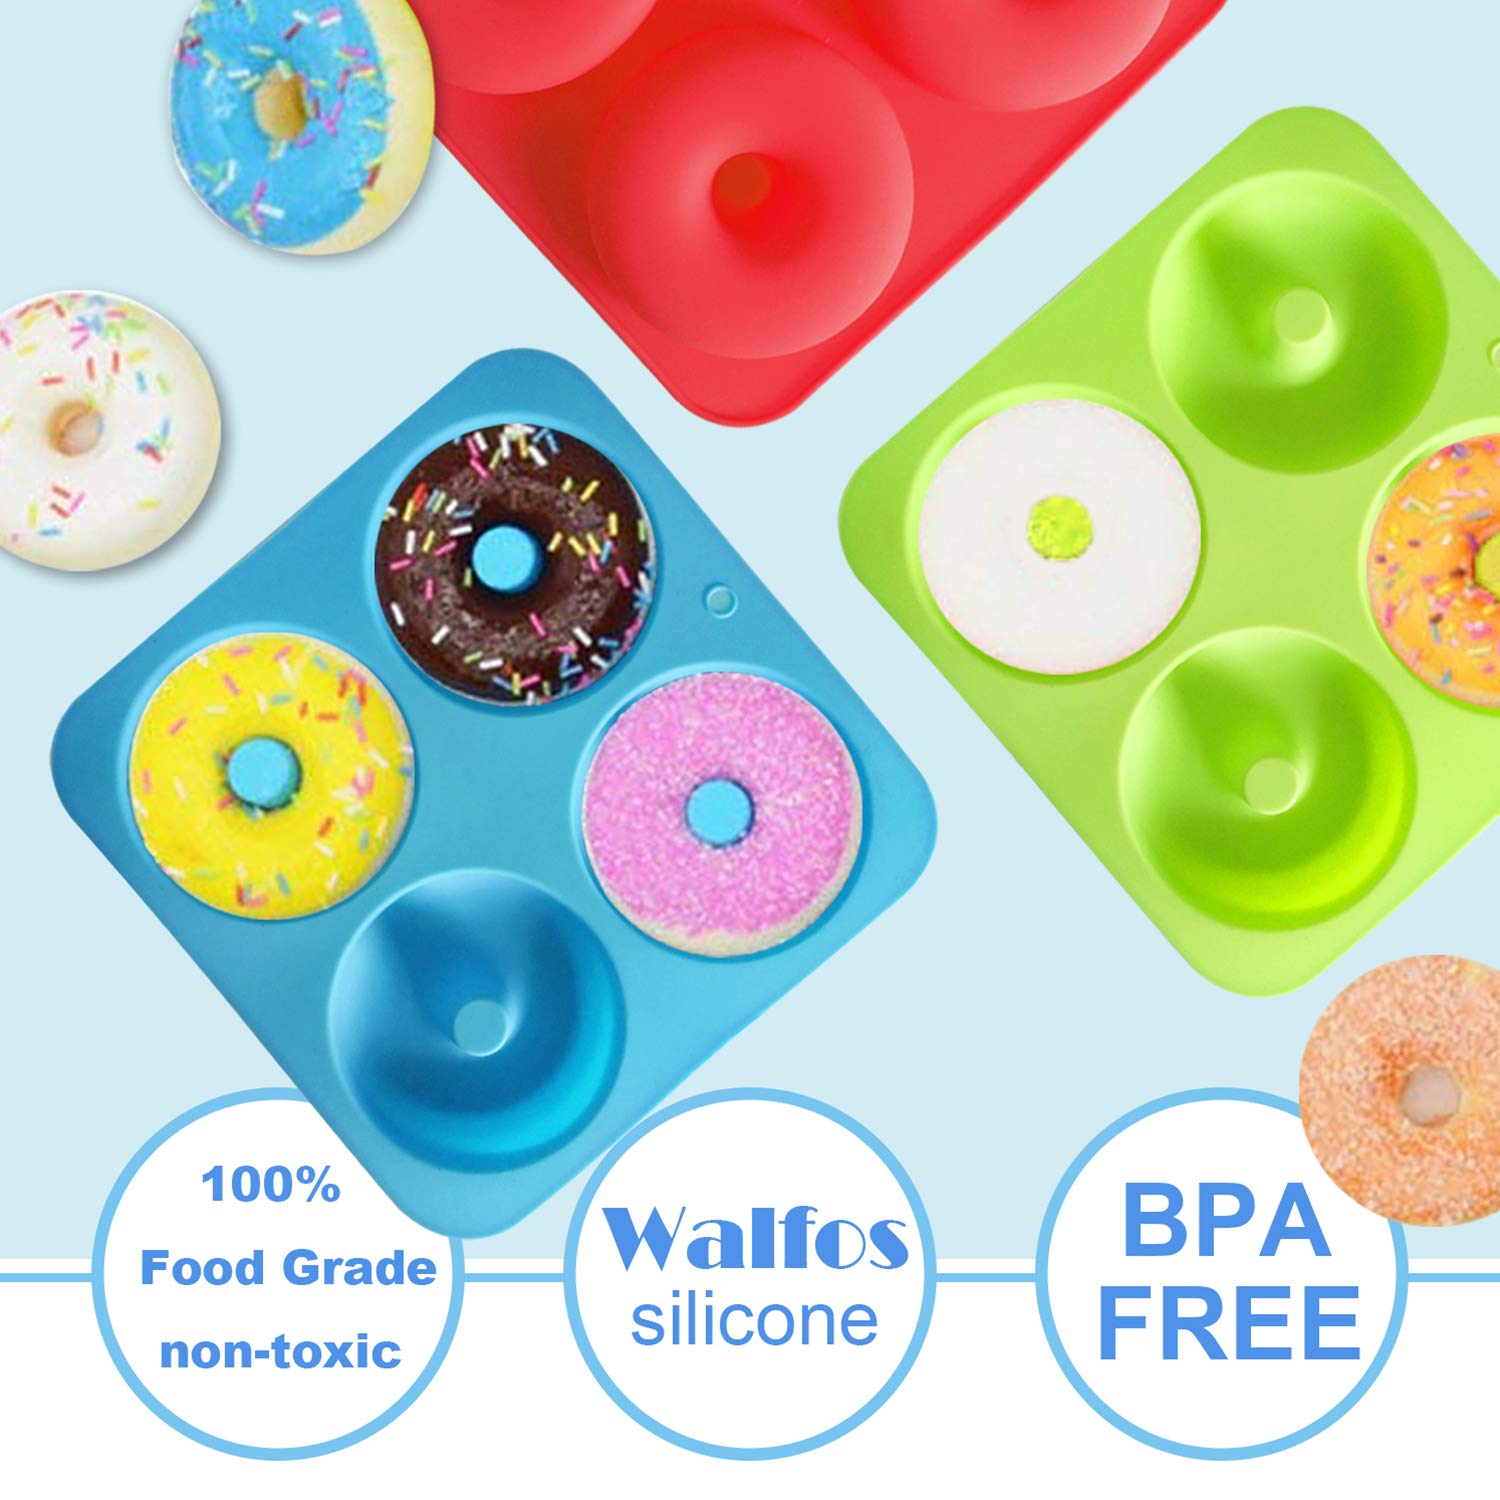 Walfos Full Size Silicone Donut Mold - 4 Inch Big Size Silicone Doughnut Pan Set, Non-Stick, Just Pop Out! Heat Resistant, BPA FREE and Dishwasher Safe, for Donut Cake Biscuit Bagels (3PK)